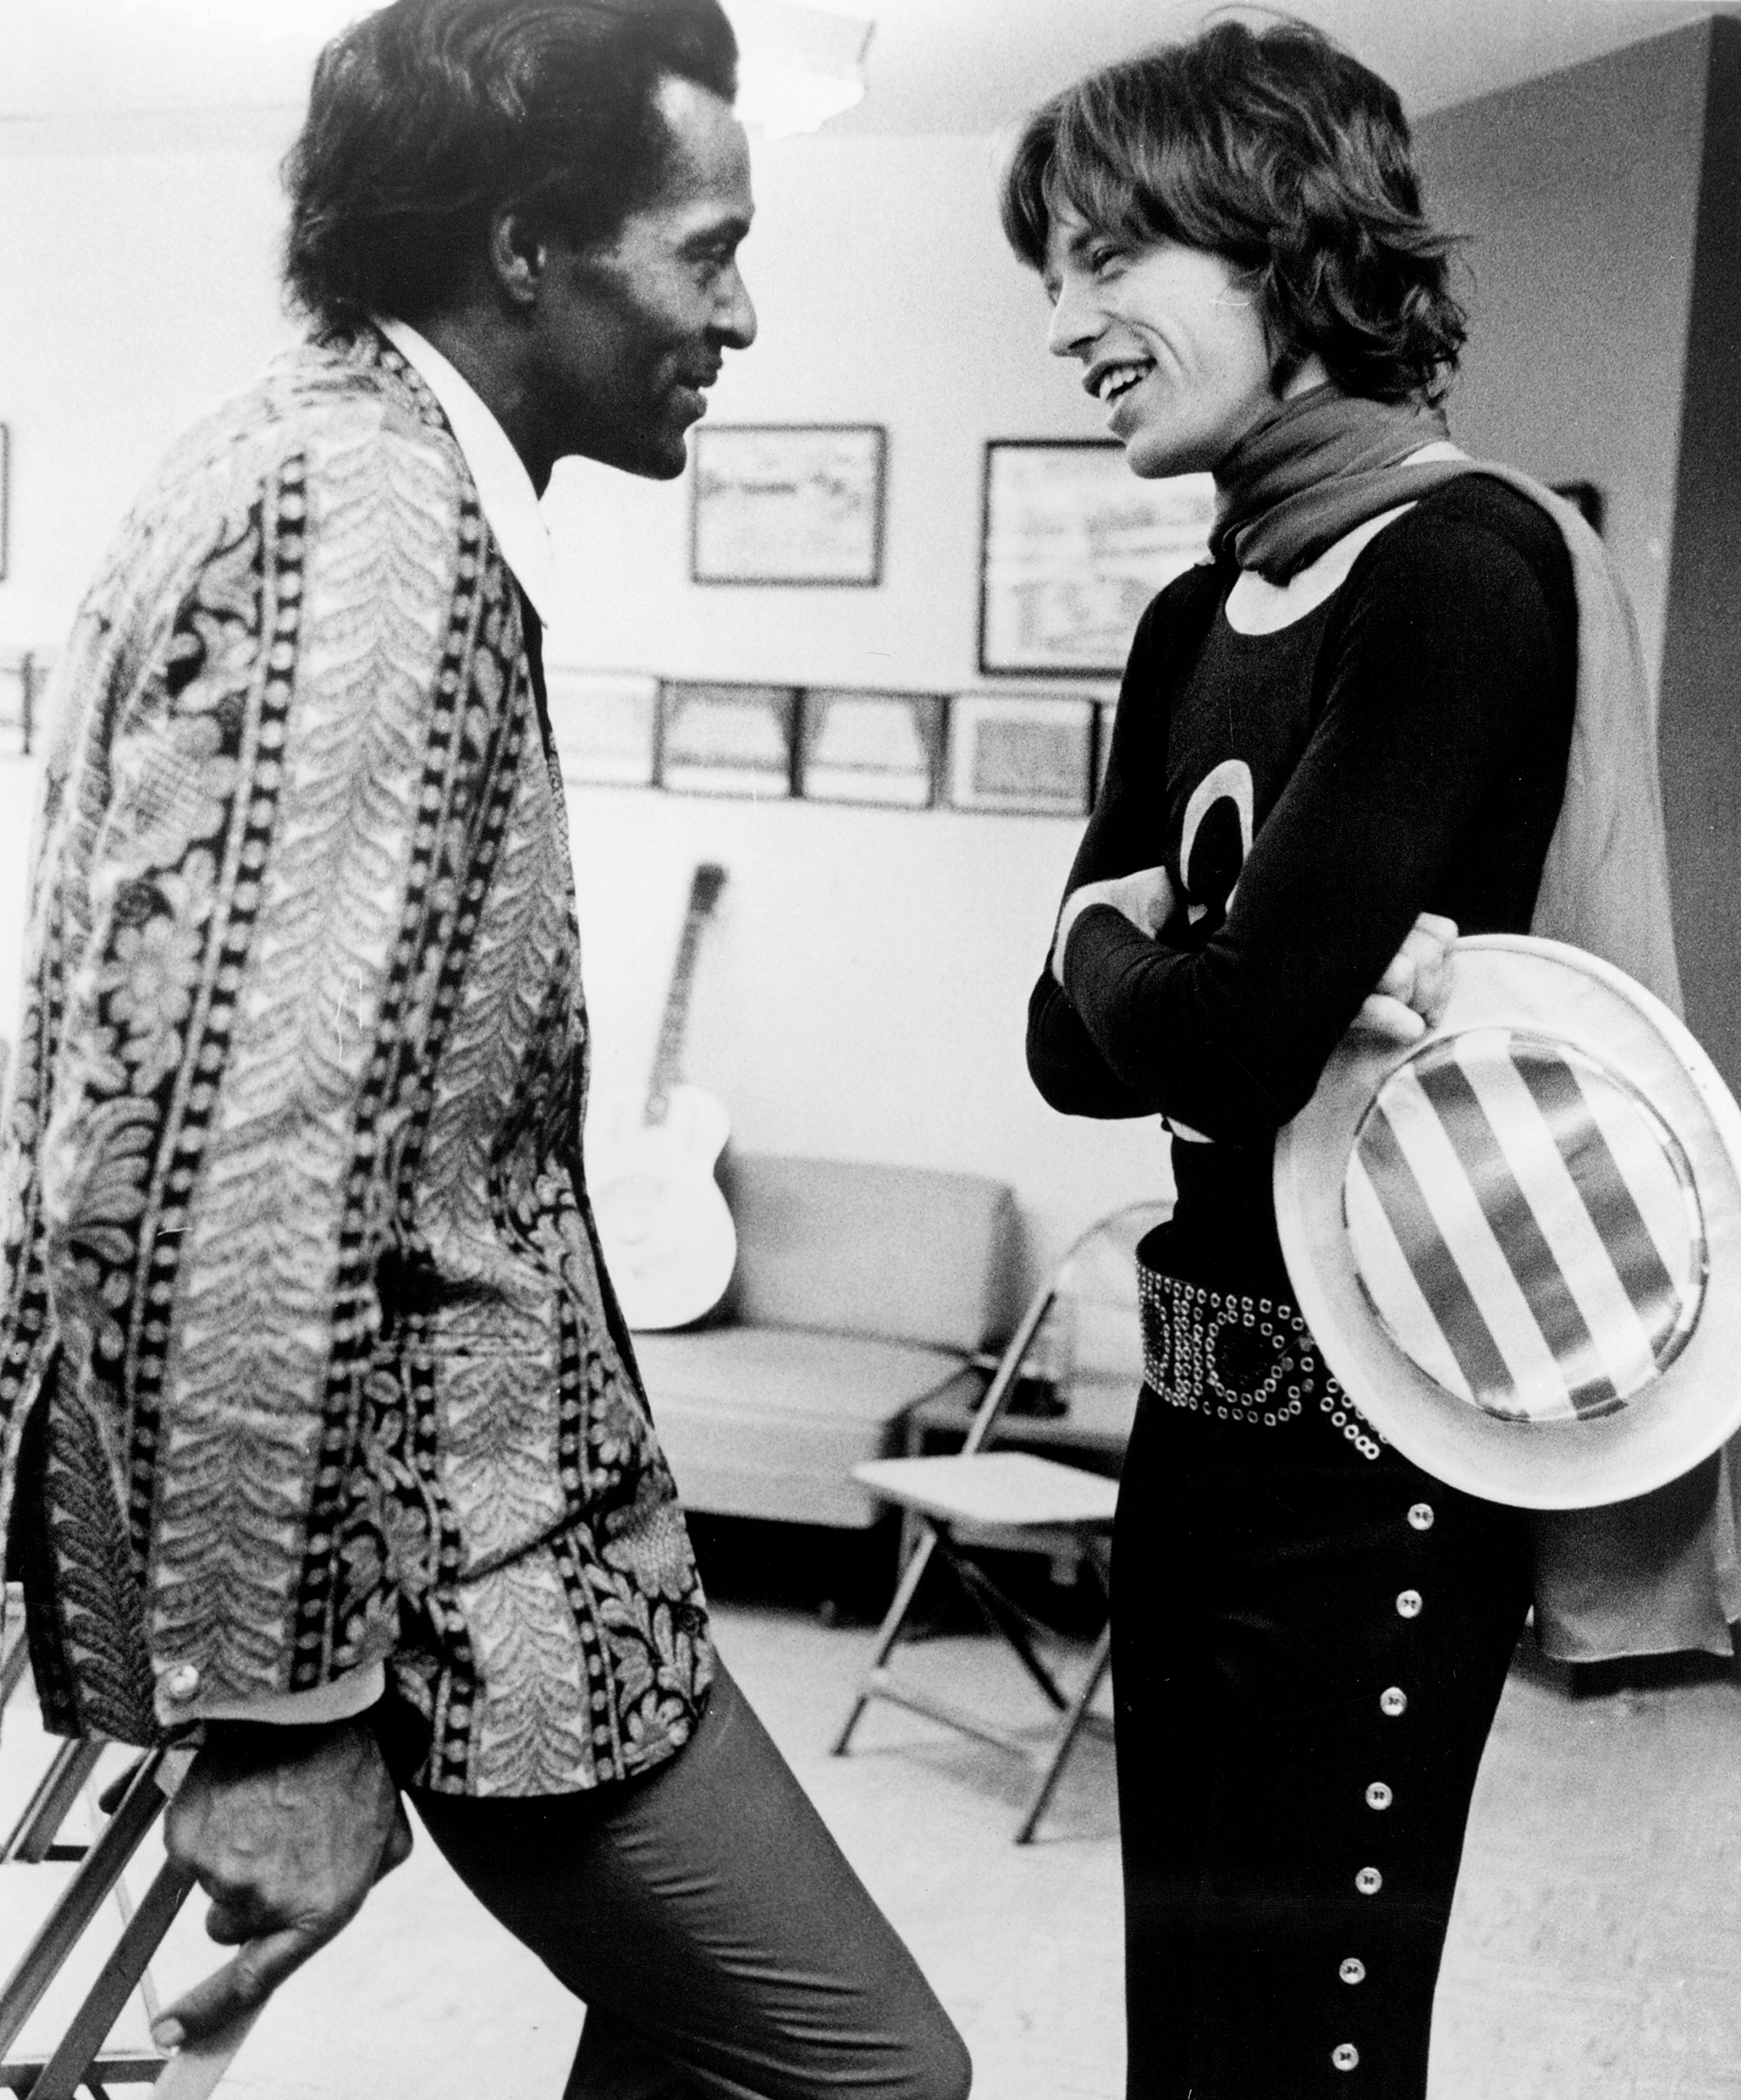 Chuck Berry and Mick Jagger of The Rolling Stones chat backstage at Madison Square Garden in New York City, on Nov. 28, 1969.